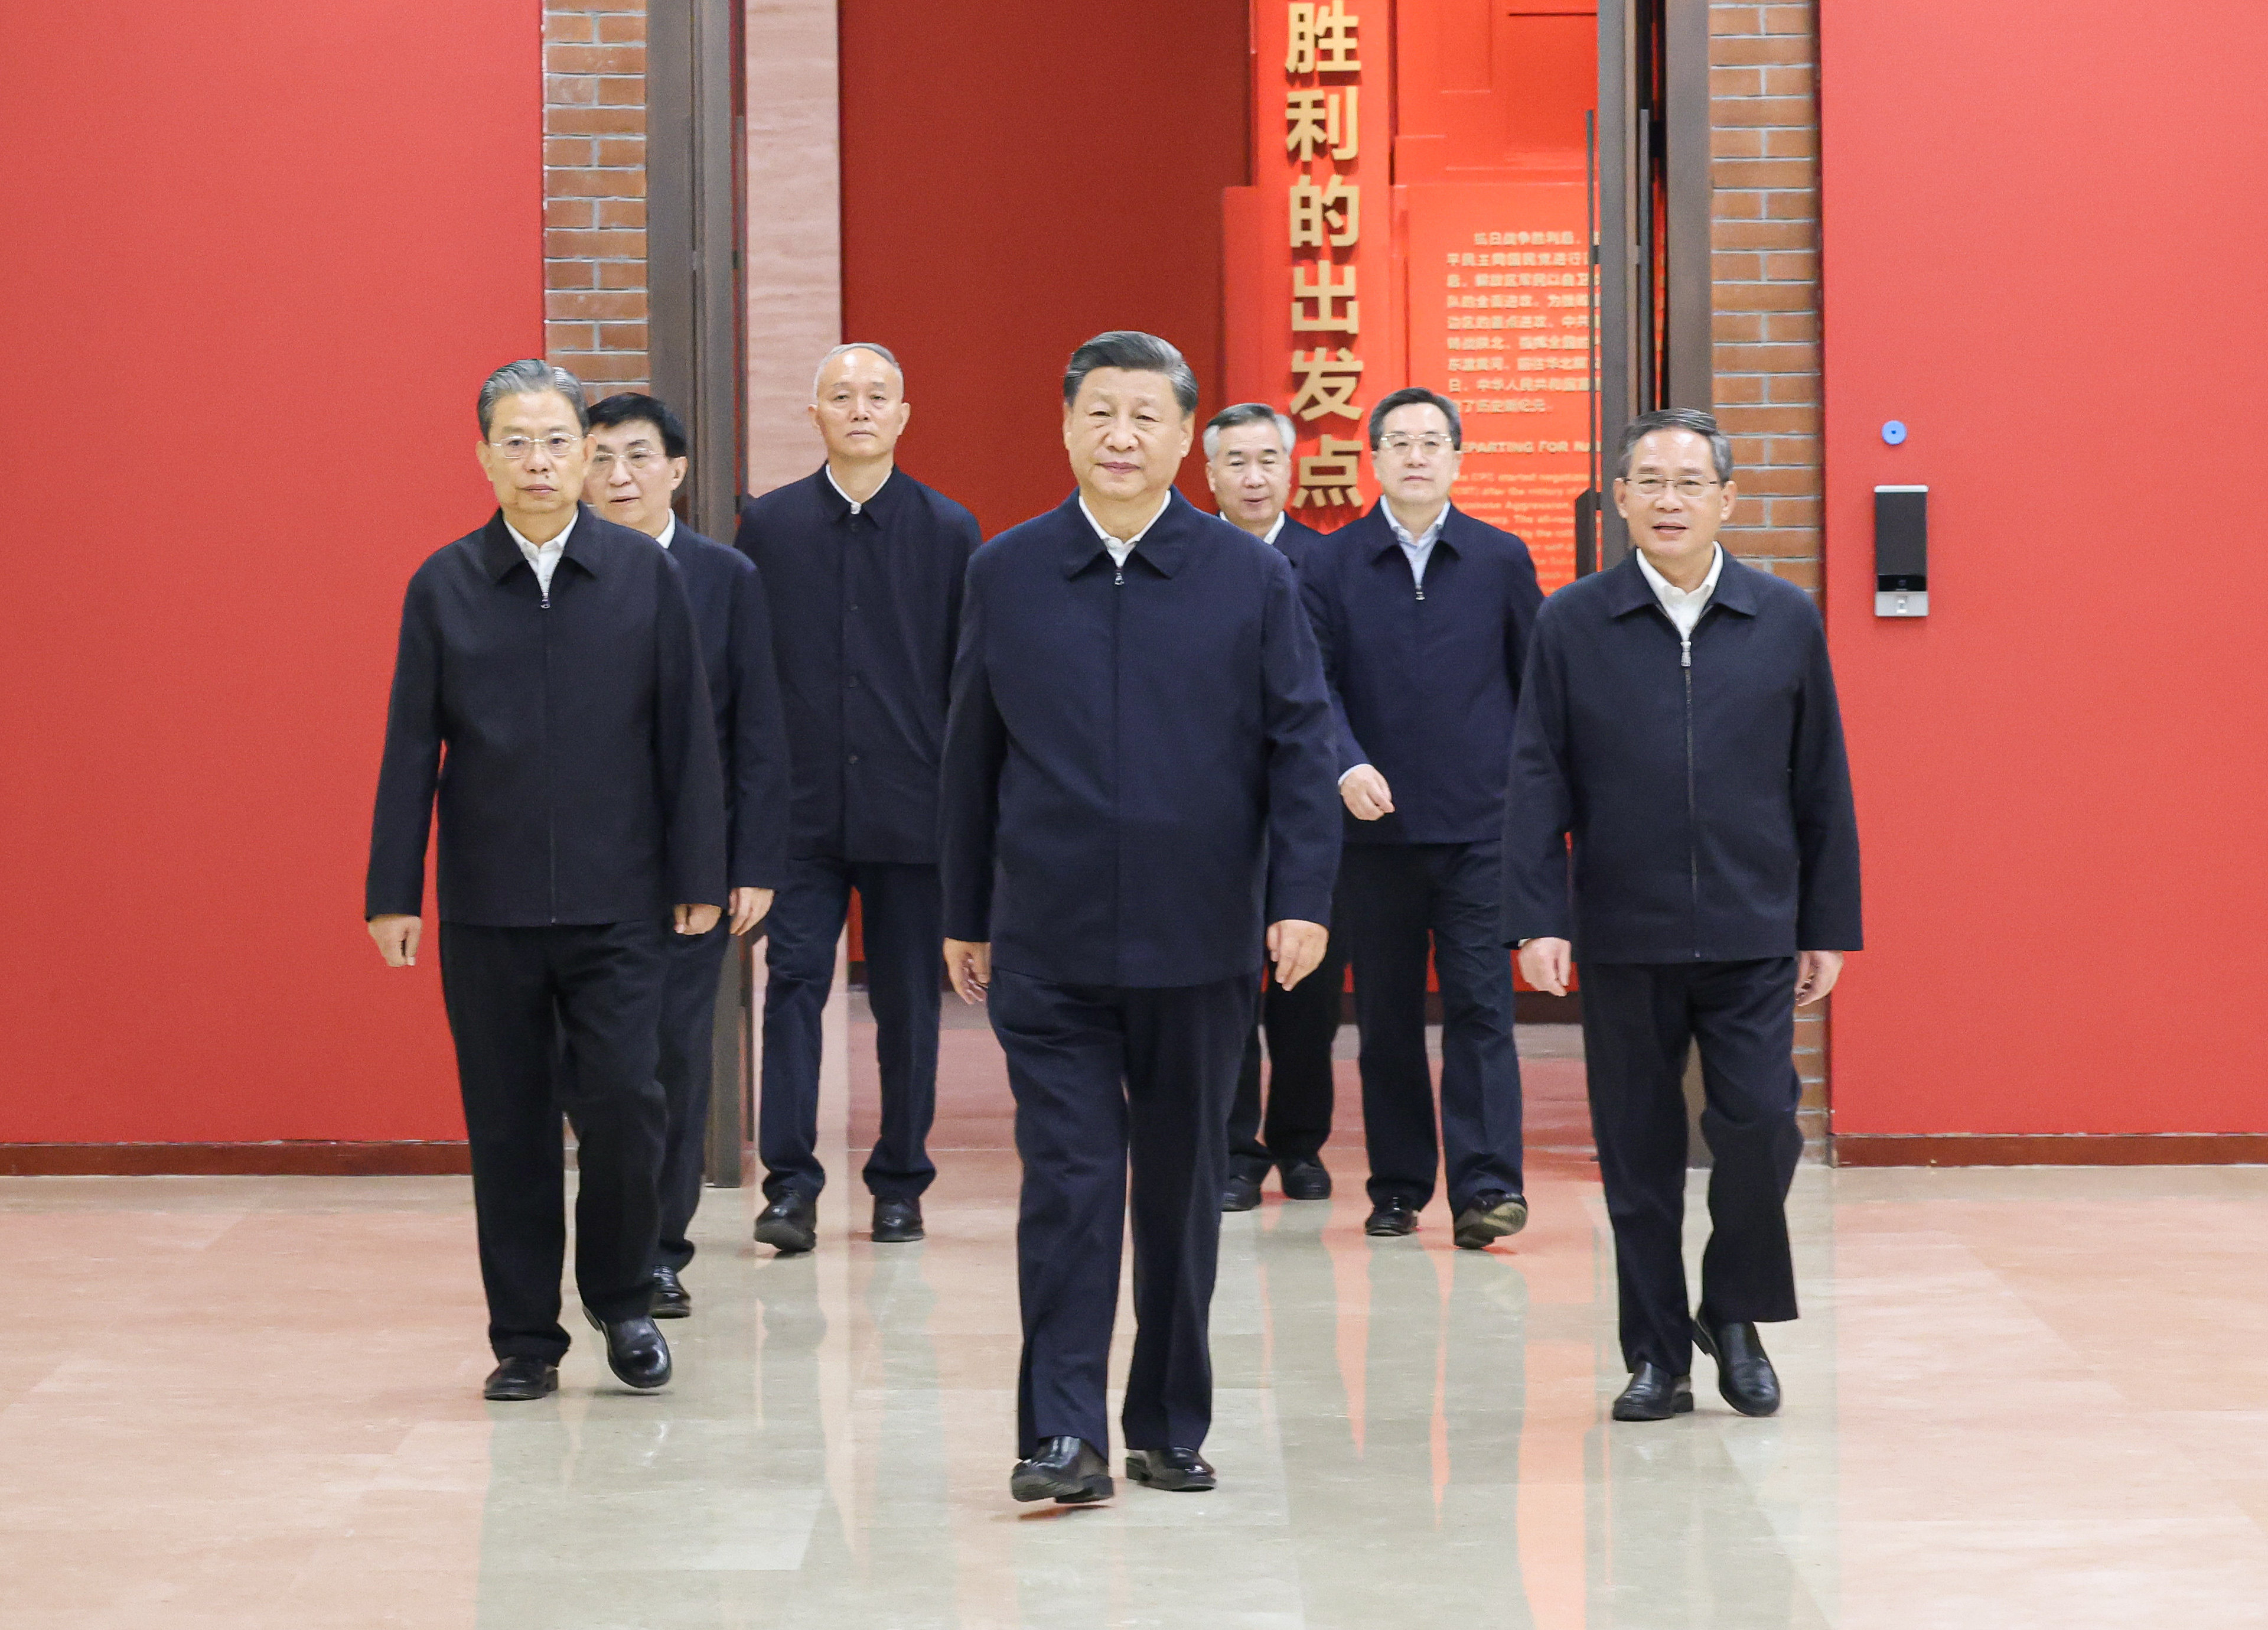 President Xi Jinping and members of the Politburo Standing Committee visit an exhibition at the Yan’an Revolutionary Memorial Hall in Shaanxi, on October 27. Photo: Xinhua